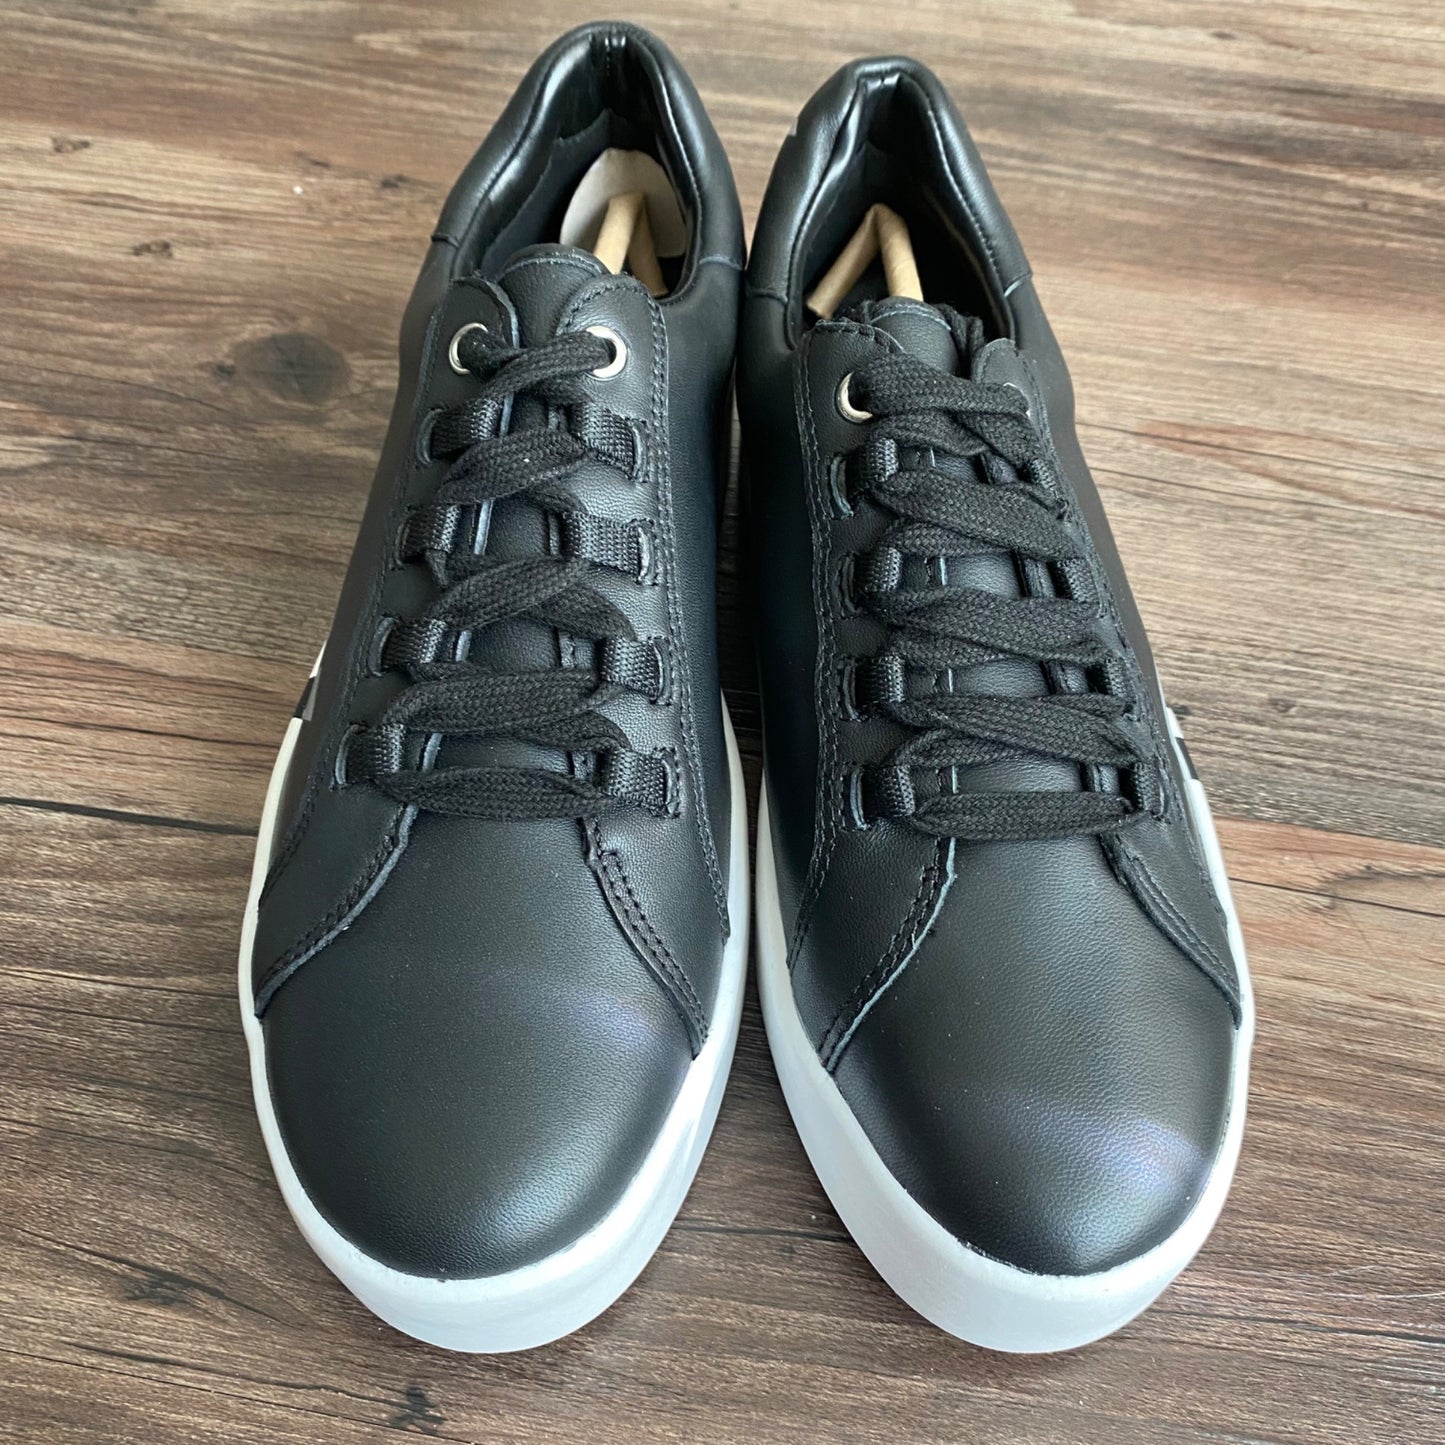 DKNY sz VARIOUS SIZES logo lace up sneakers NWT